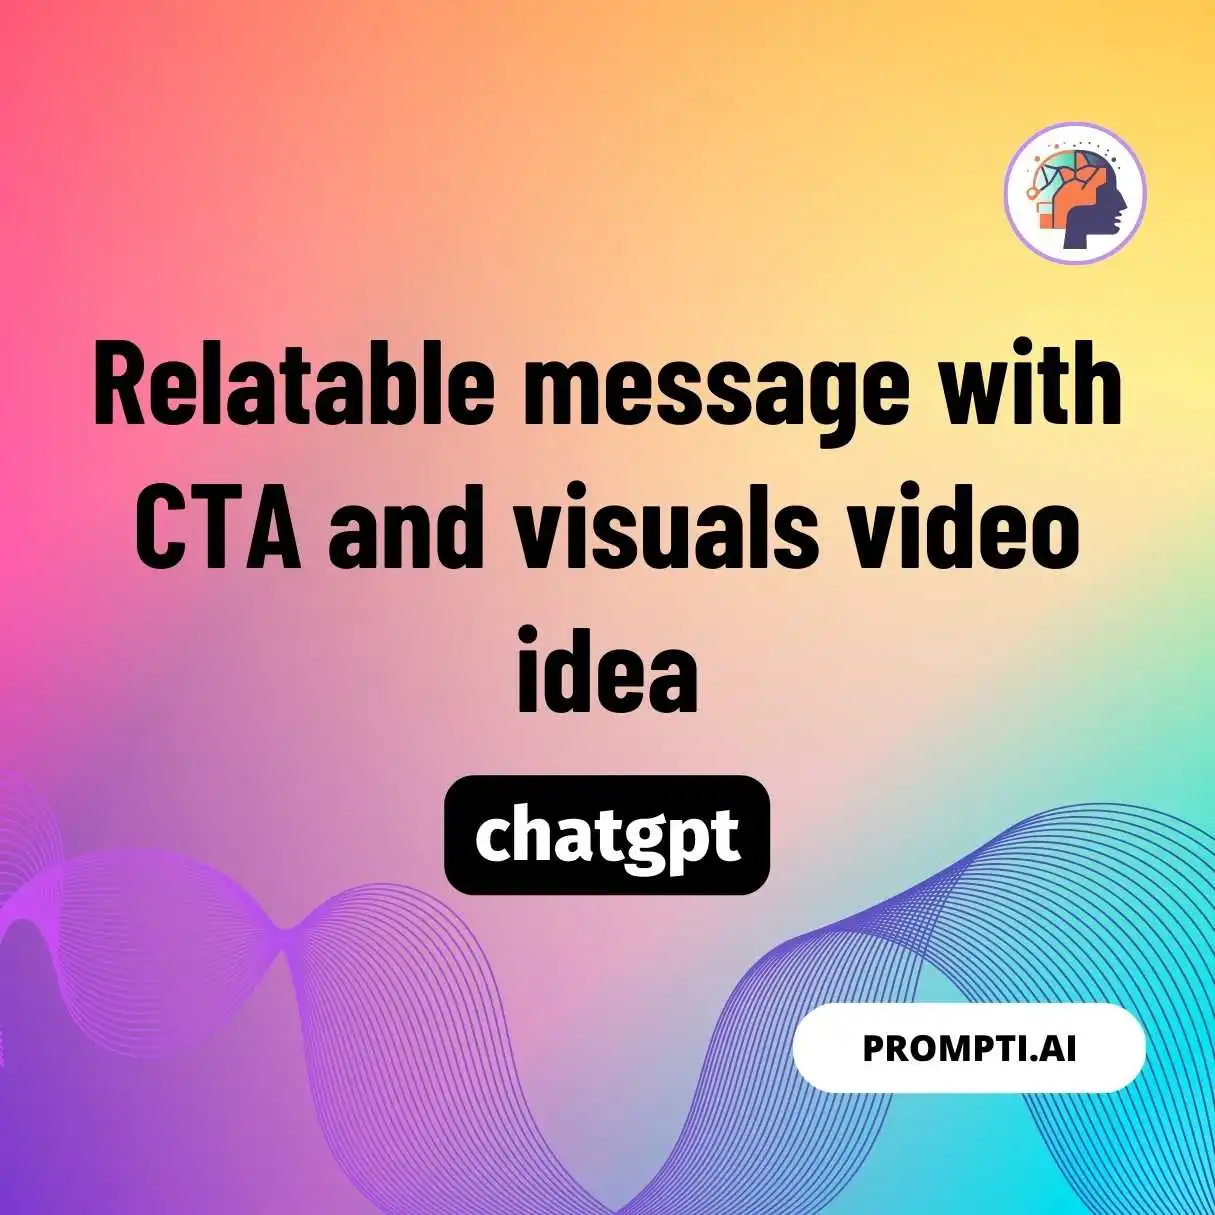 Relatable message with CTA and visuals video idea